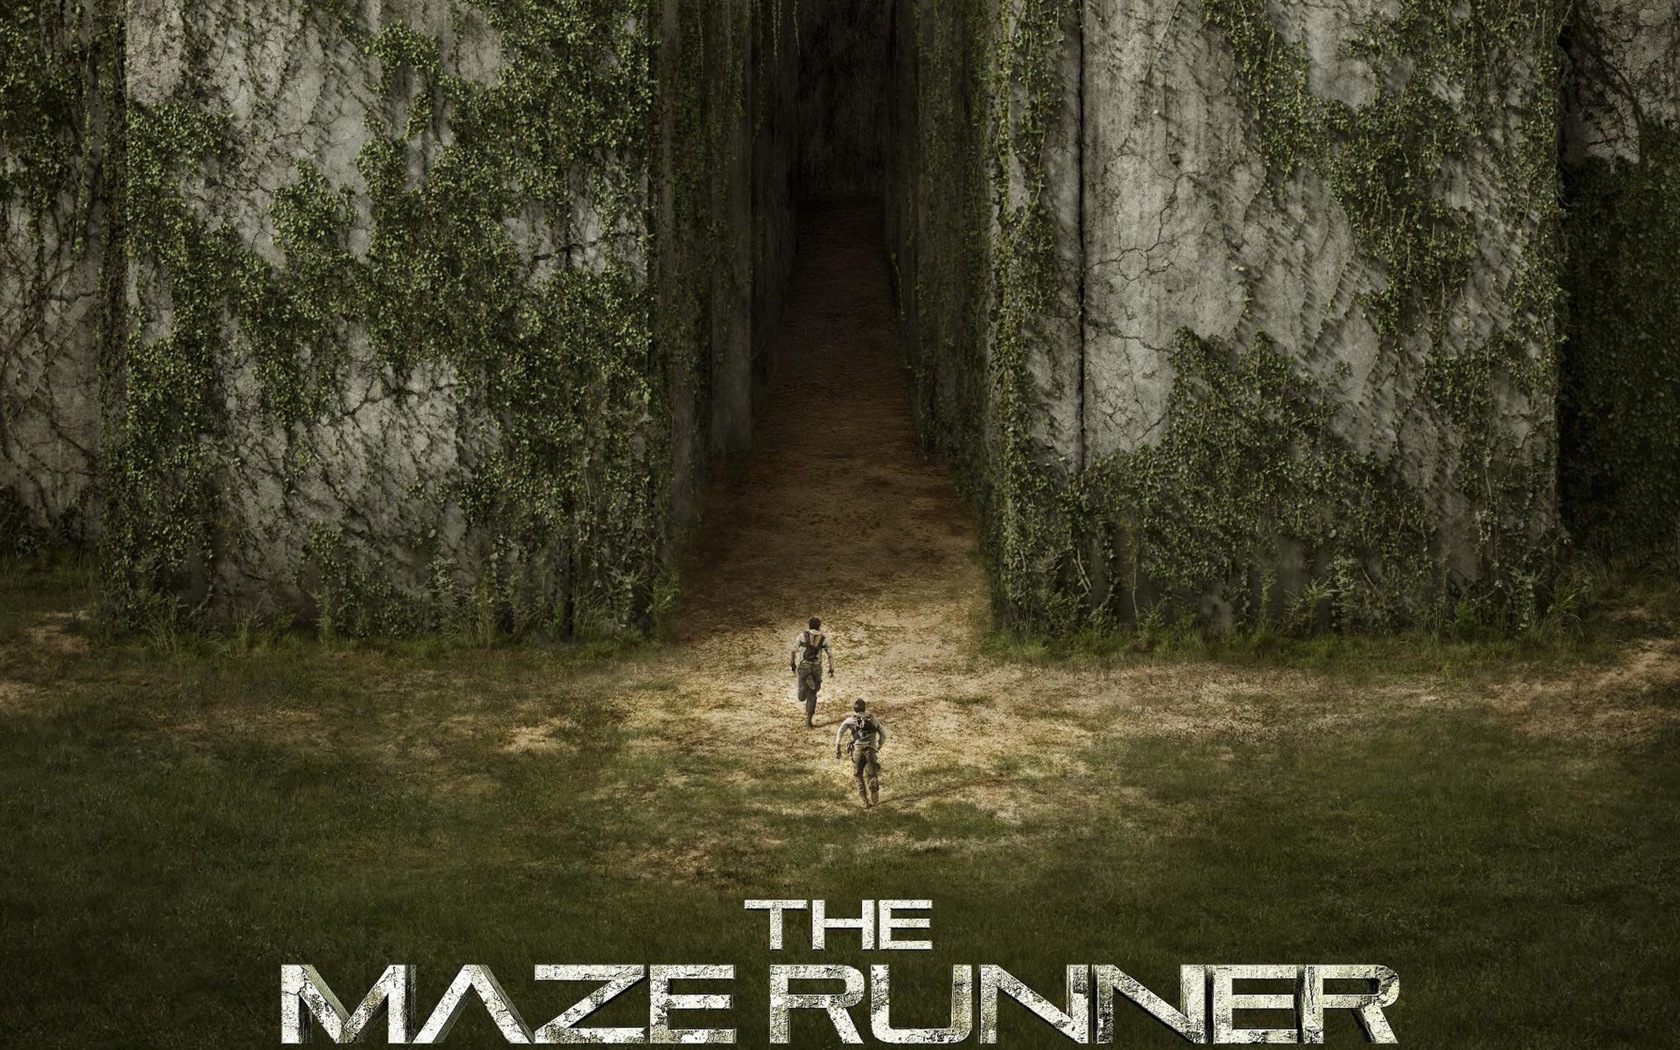 The Maze Runner HD movie wallpapers #5 - 1680x1050